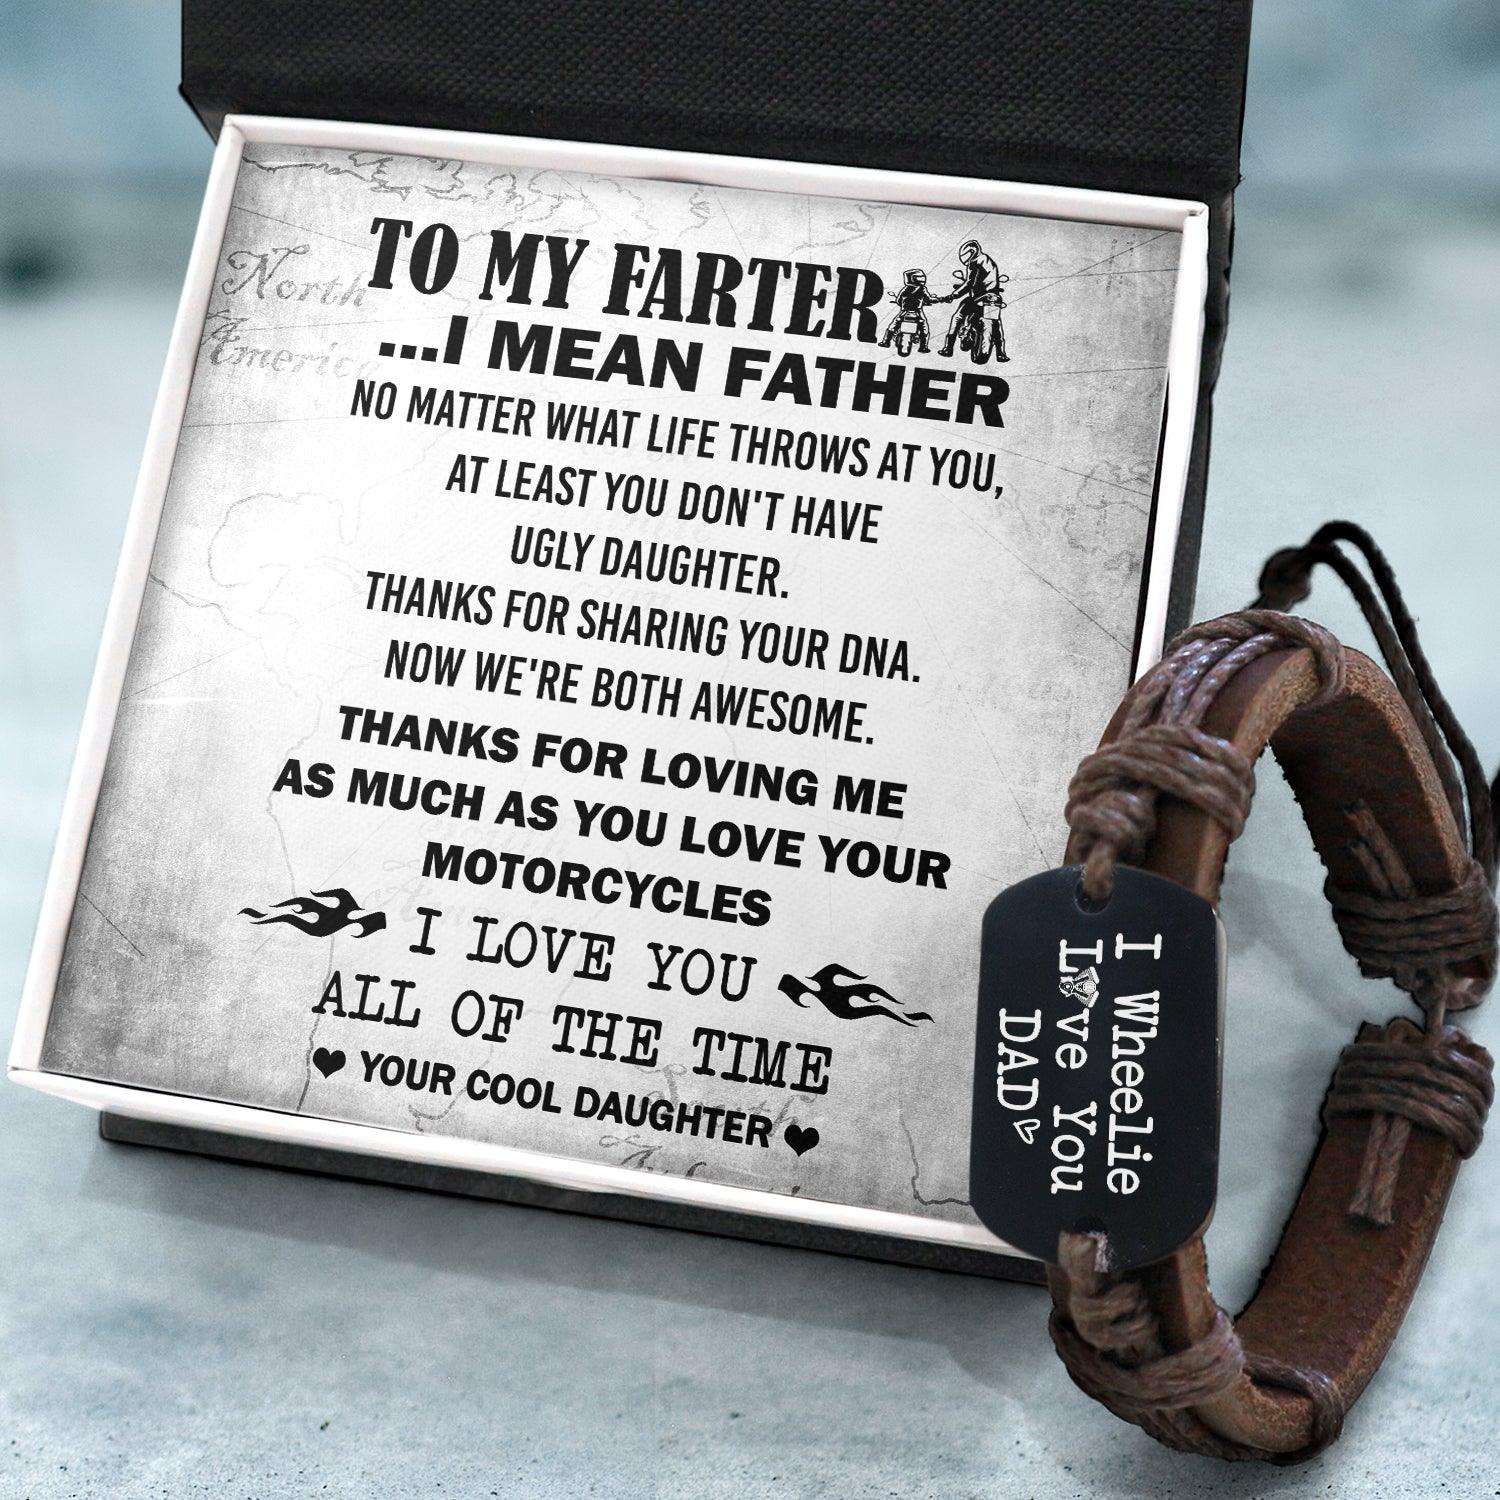 Leather Cord Bracelet - Biker - To My Father - From Daughter - Thanks For Sharing Your DNA - Augbr18005 - Gifts Holder